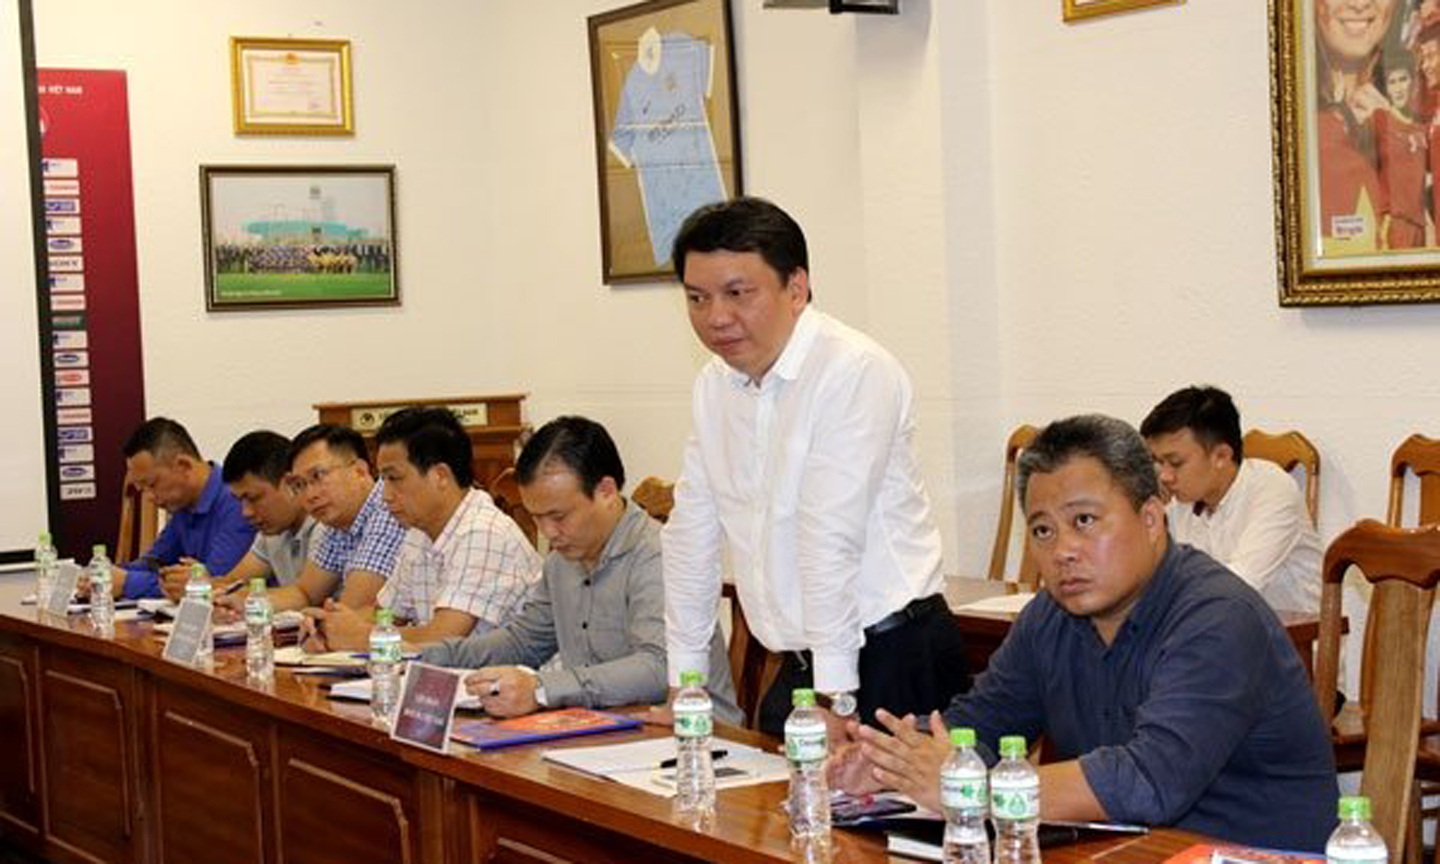  VFF General Secretary Le Hoai Anh speaks at the meeting. (Photo: VFF)